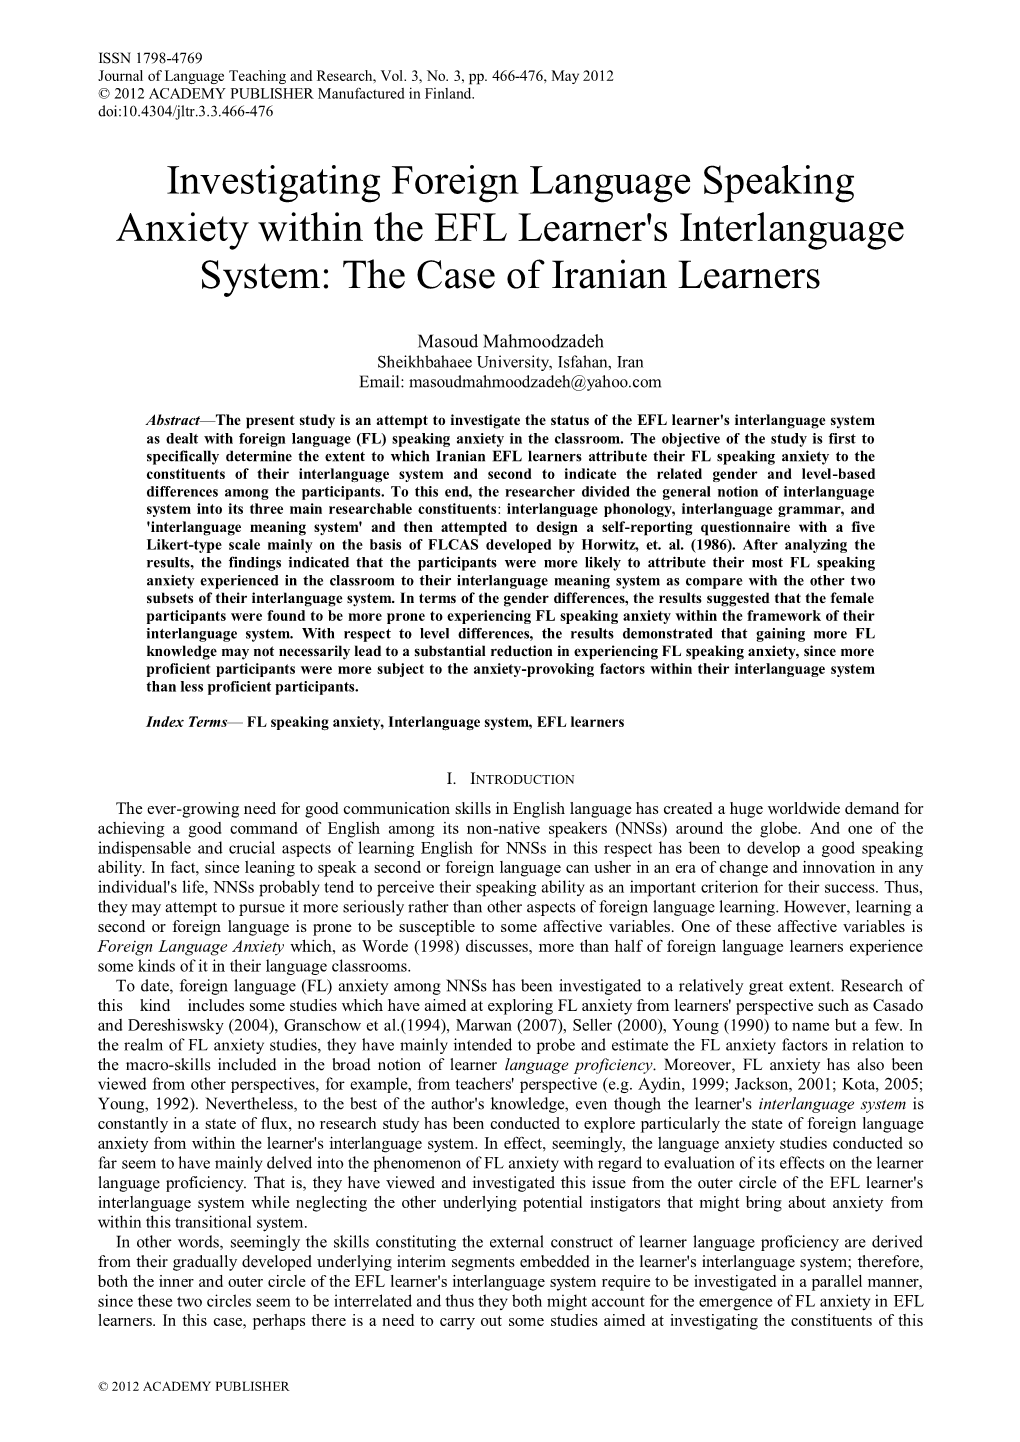 Investigating Foreign Language Speaking Anxiety Within the EFL Learner's Interlanguage System: the Case of Iranian Learners